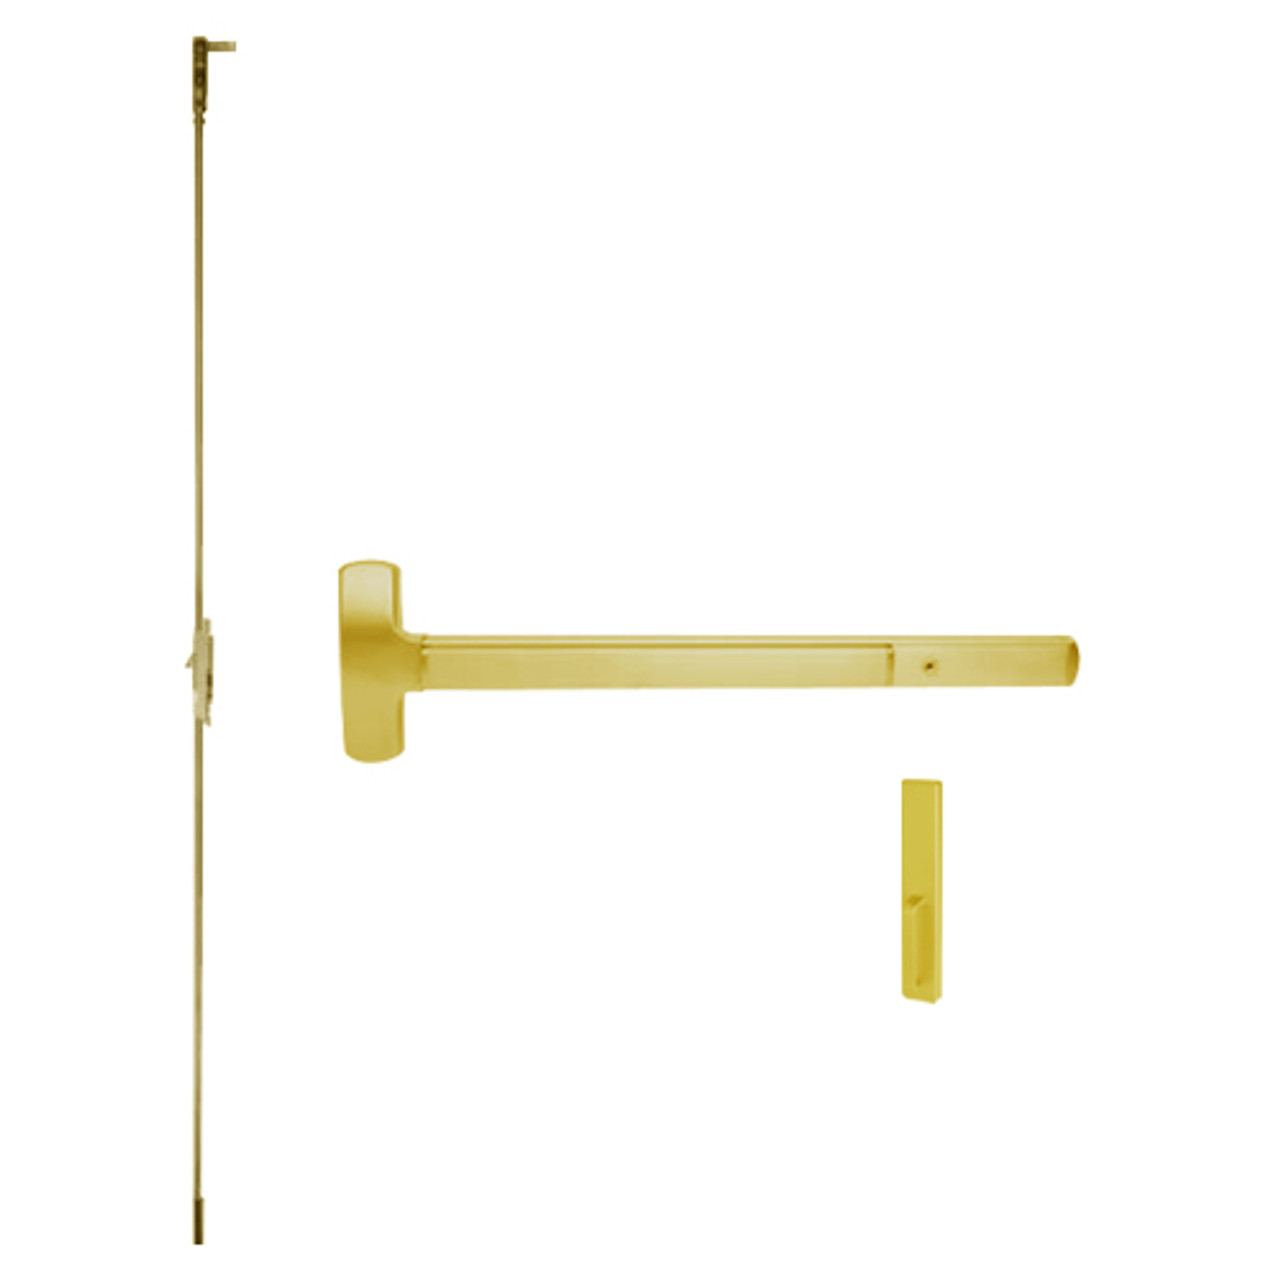 25-C-DT-US3-4 Falcon Exit Device in Polished Brass